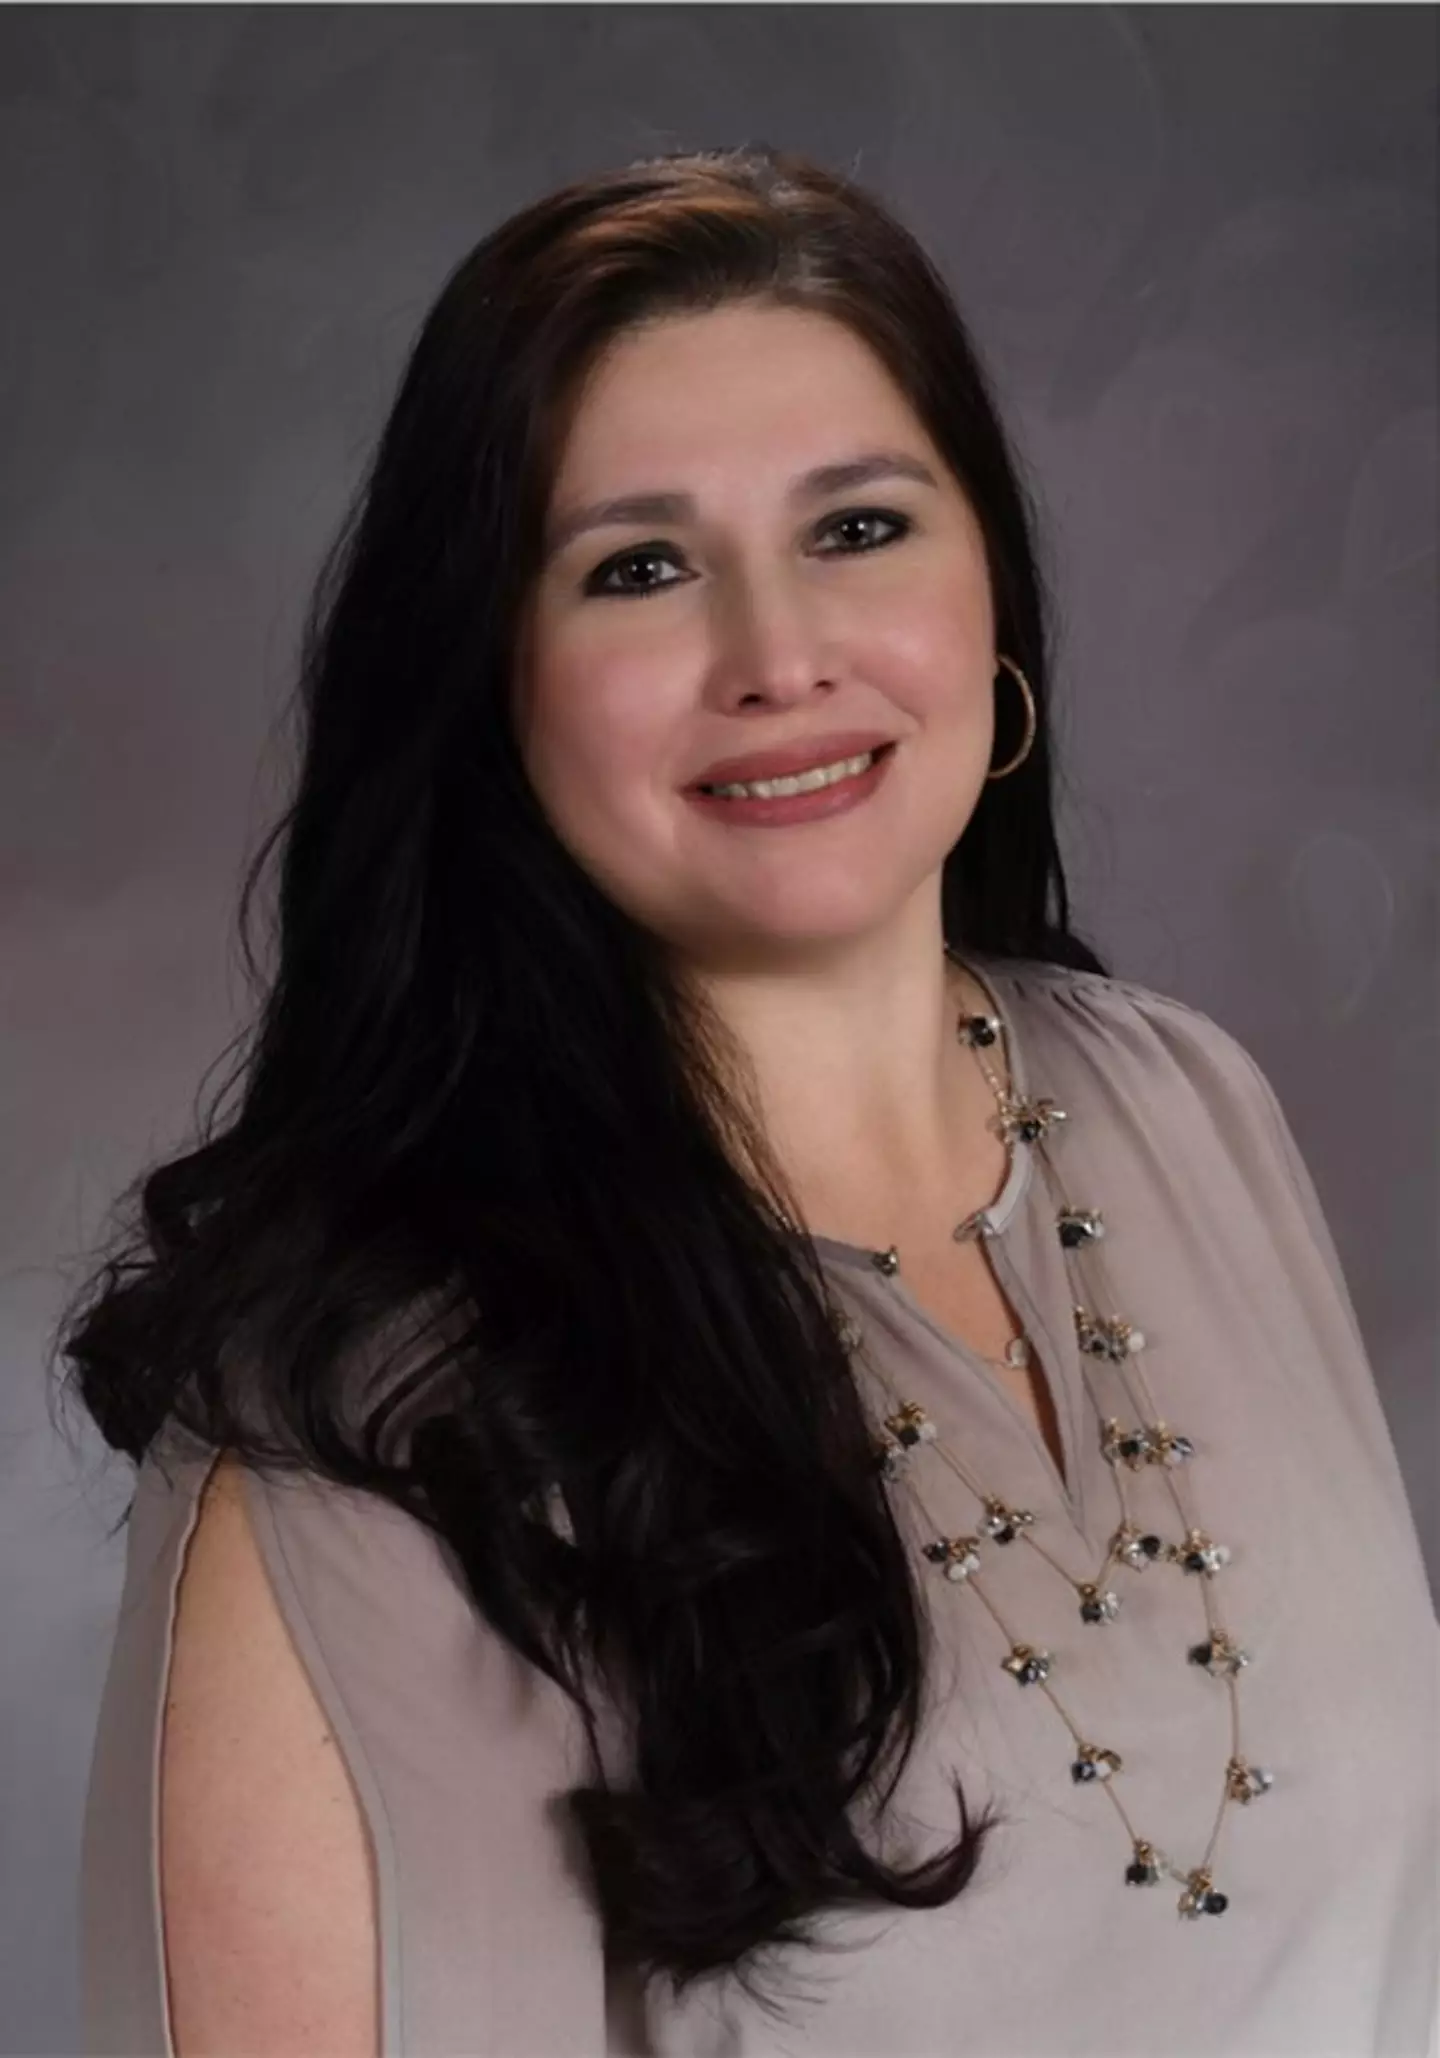 Irma Garcia was one of the two teachers killed in the Uvalde school shooting.